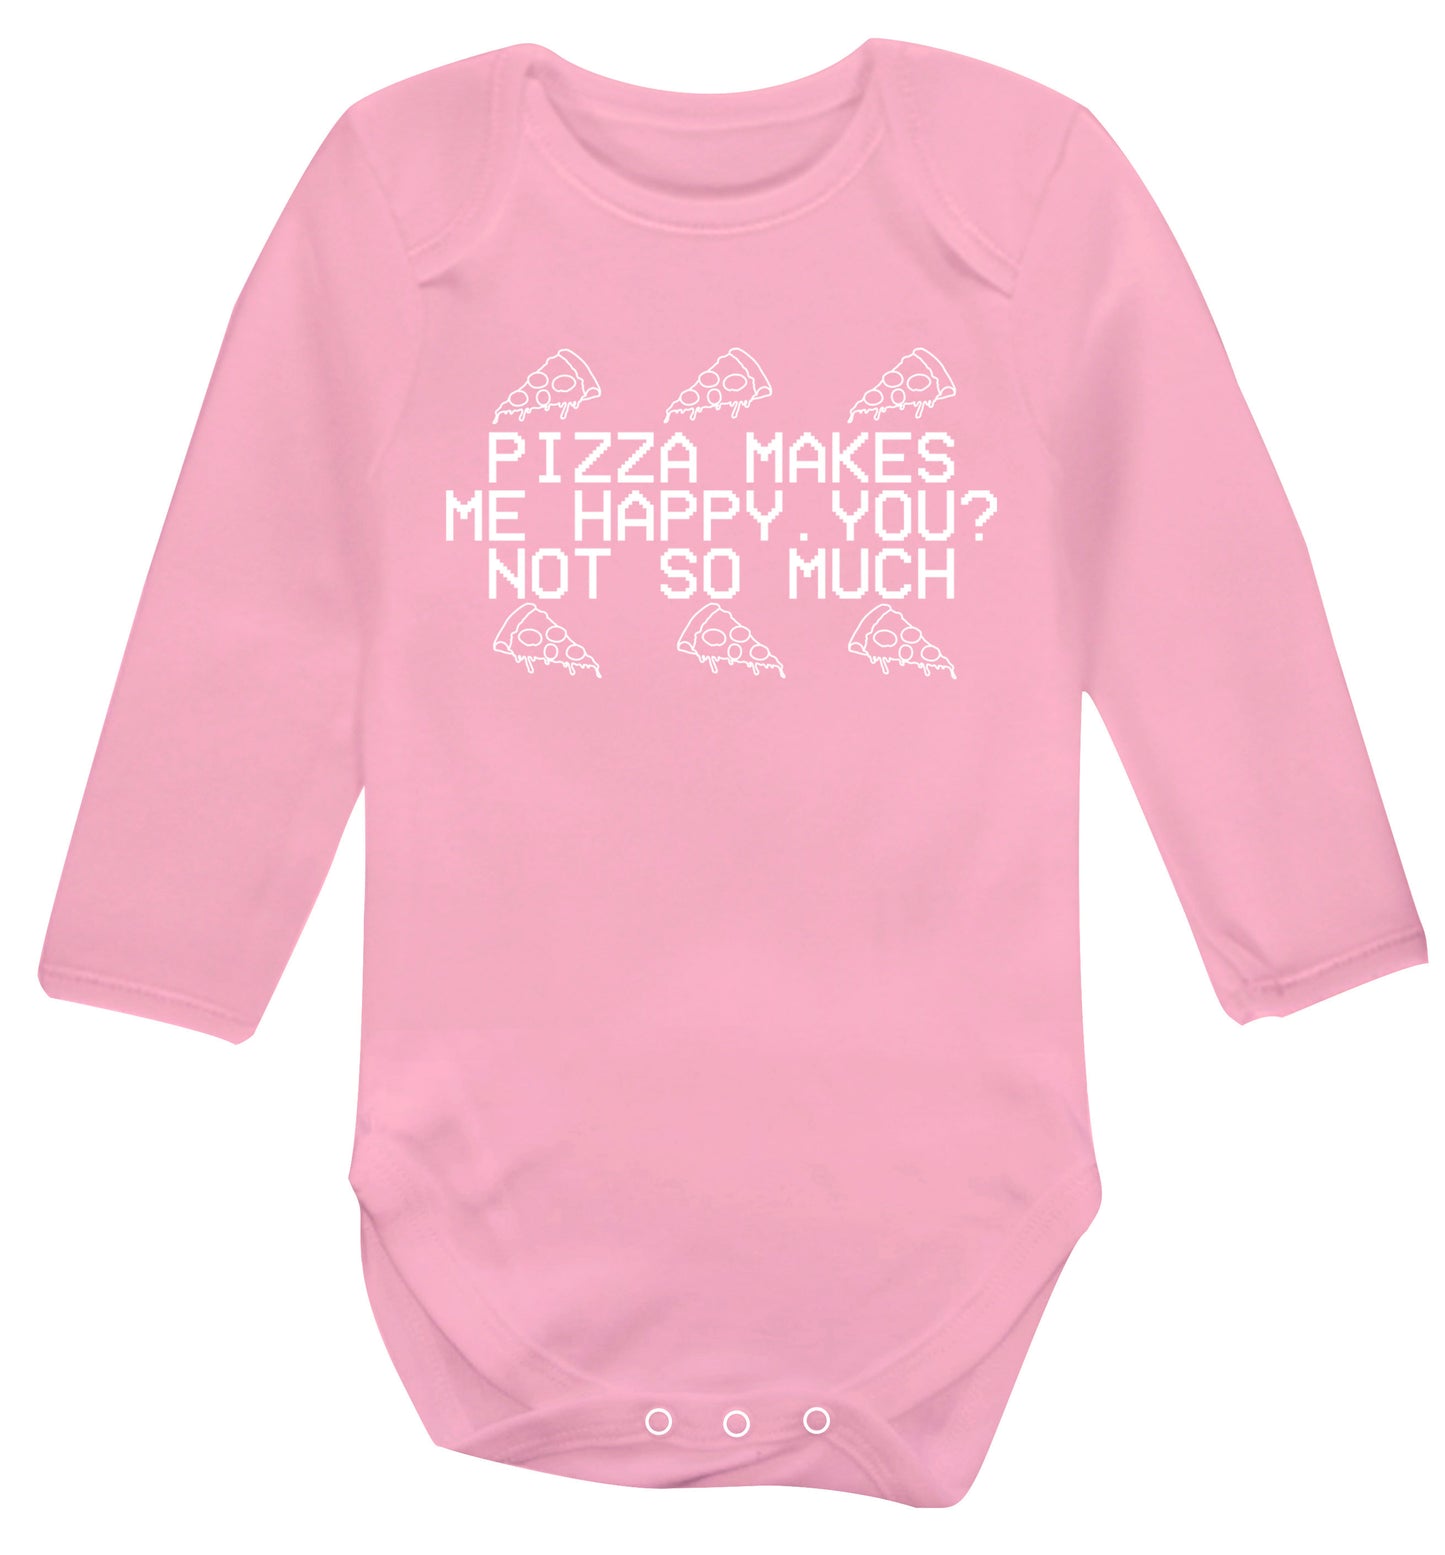 Pizza makes me happy, You? Not so much Baby Vest long sleeved pale pink 6-12 months